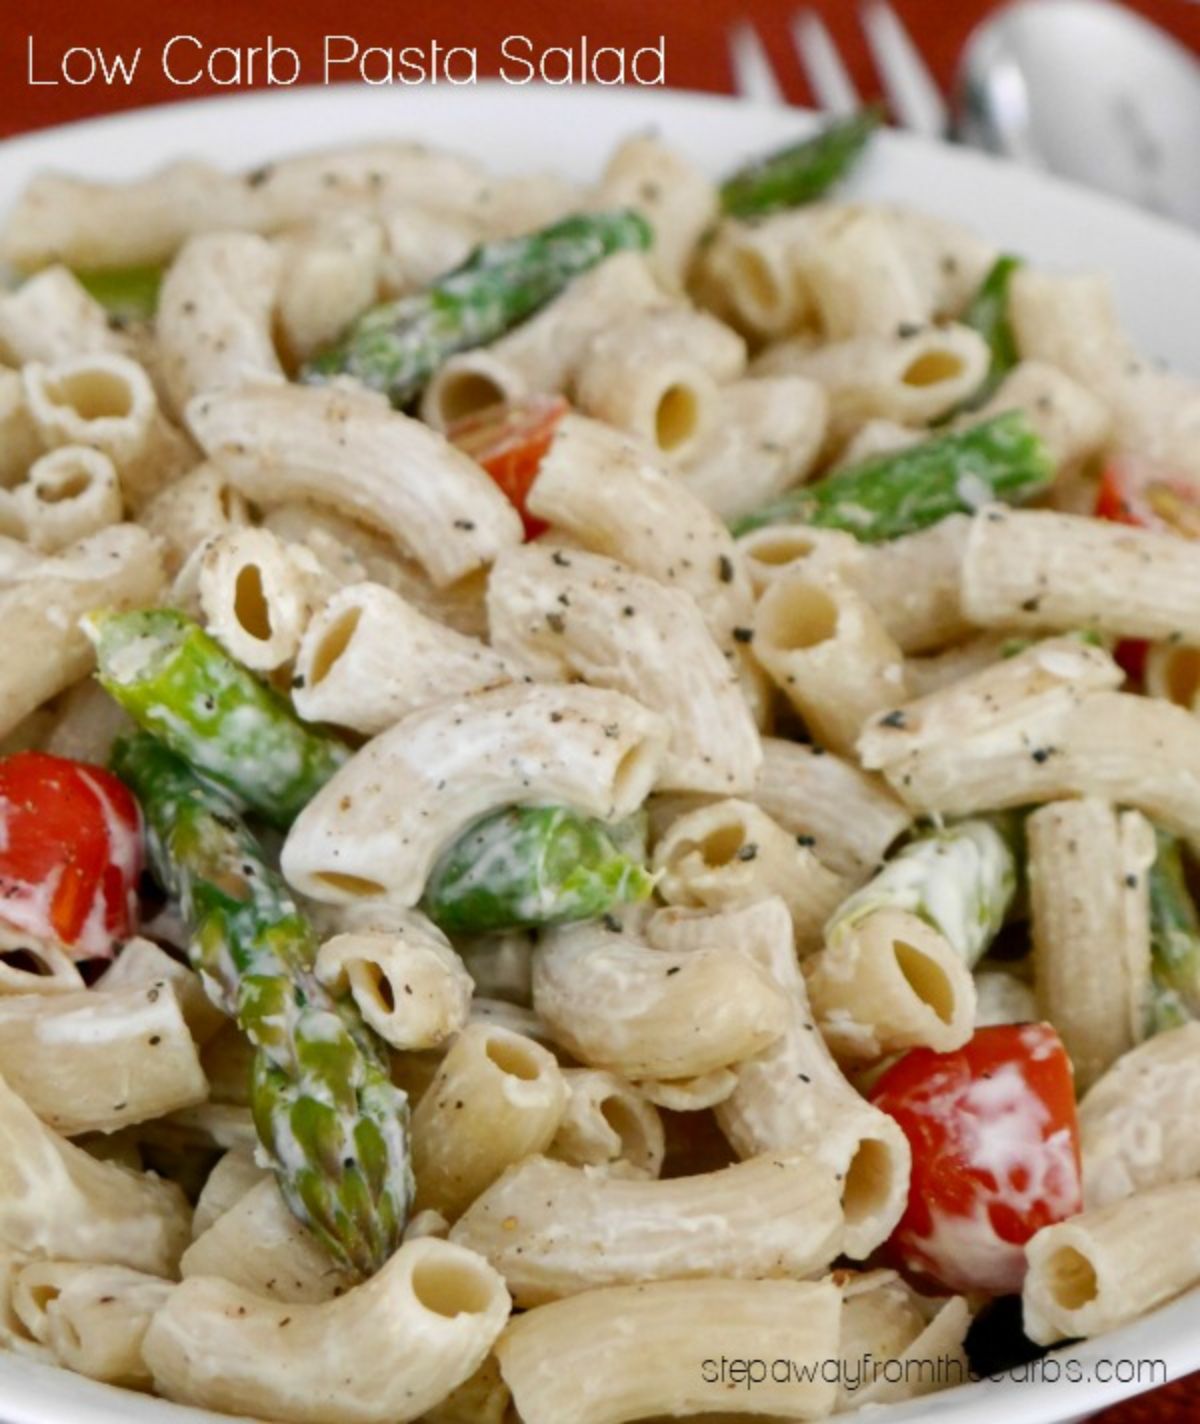 The text reads "Low Carb Pasta Salad". A white bowl is filled with tube pasta mixed with a creamy sauce, green beans and halved cherry tomatoes